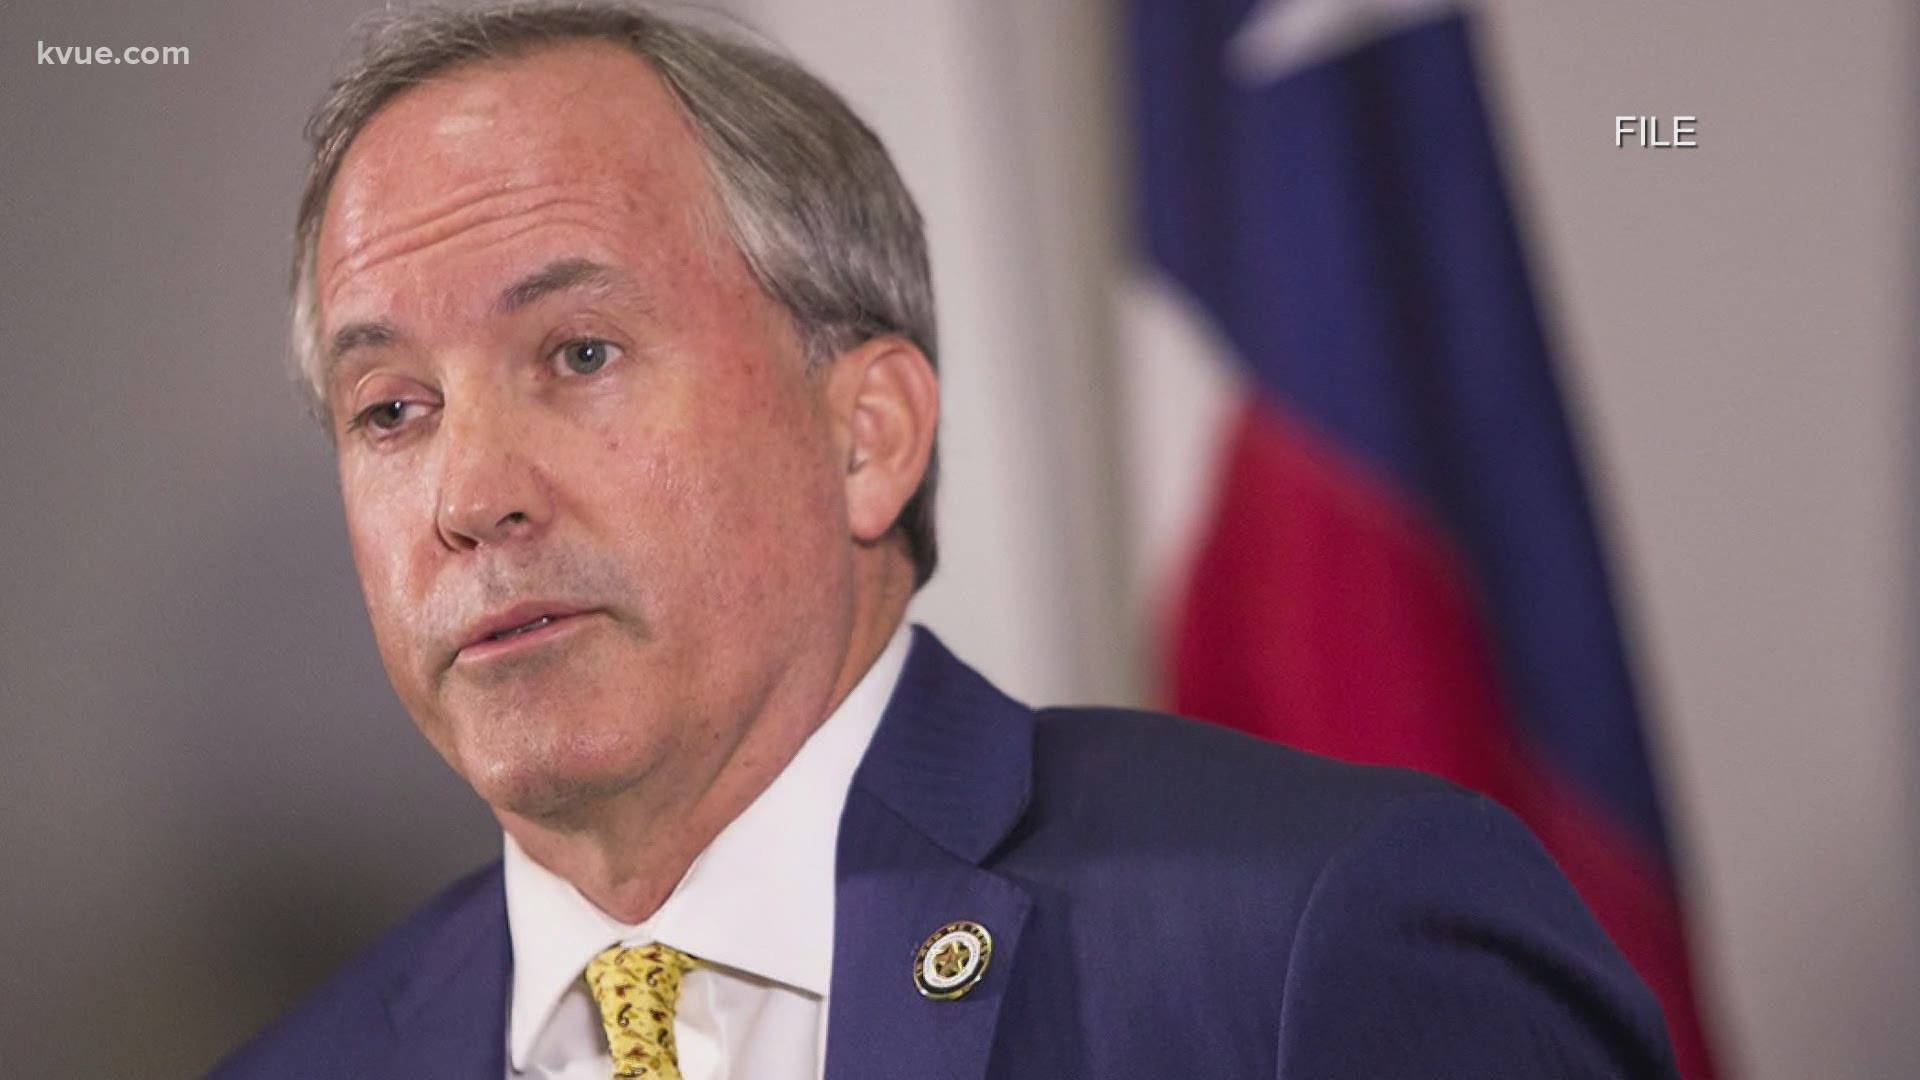 Texas Attorney General Ken Paxton is suing four battleground states over the presidential election results.